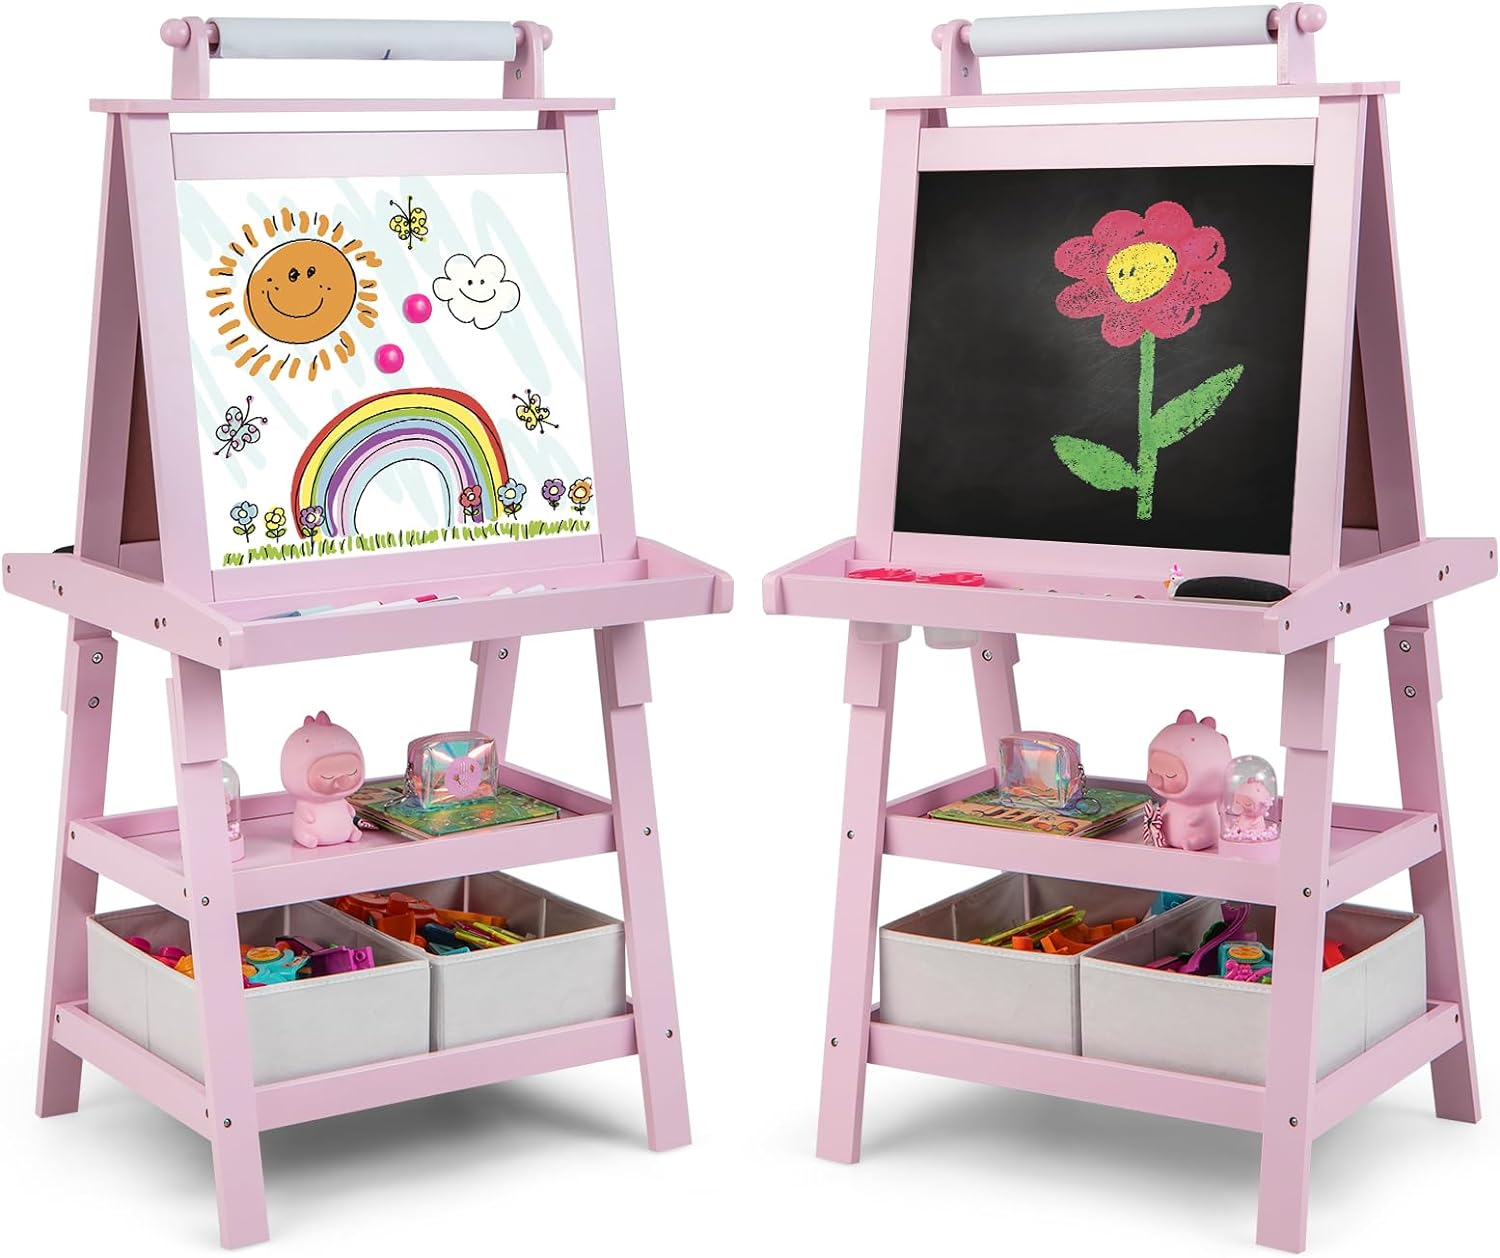 Costzon Kids Art Easel, 3 in 1 Double-Sided Storage Easel, Pink